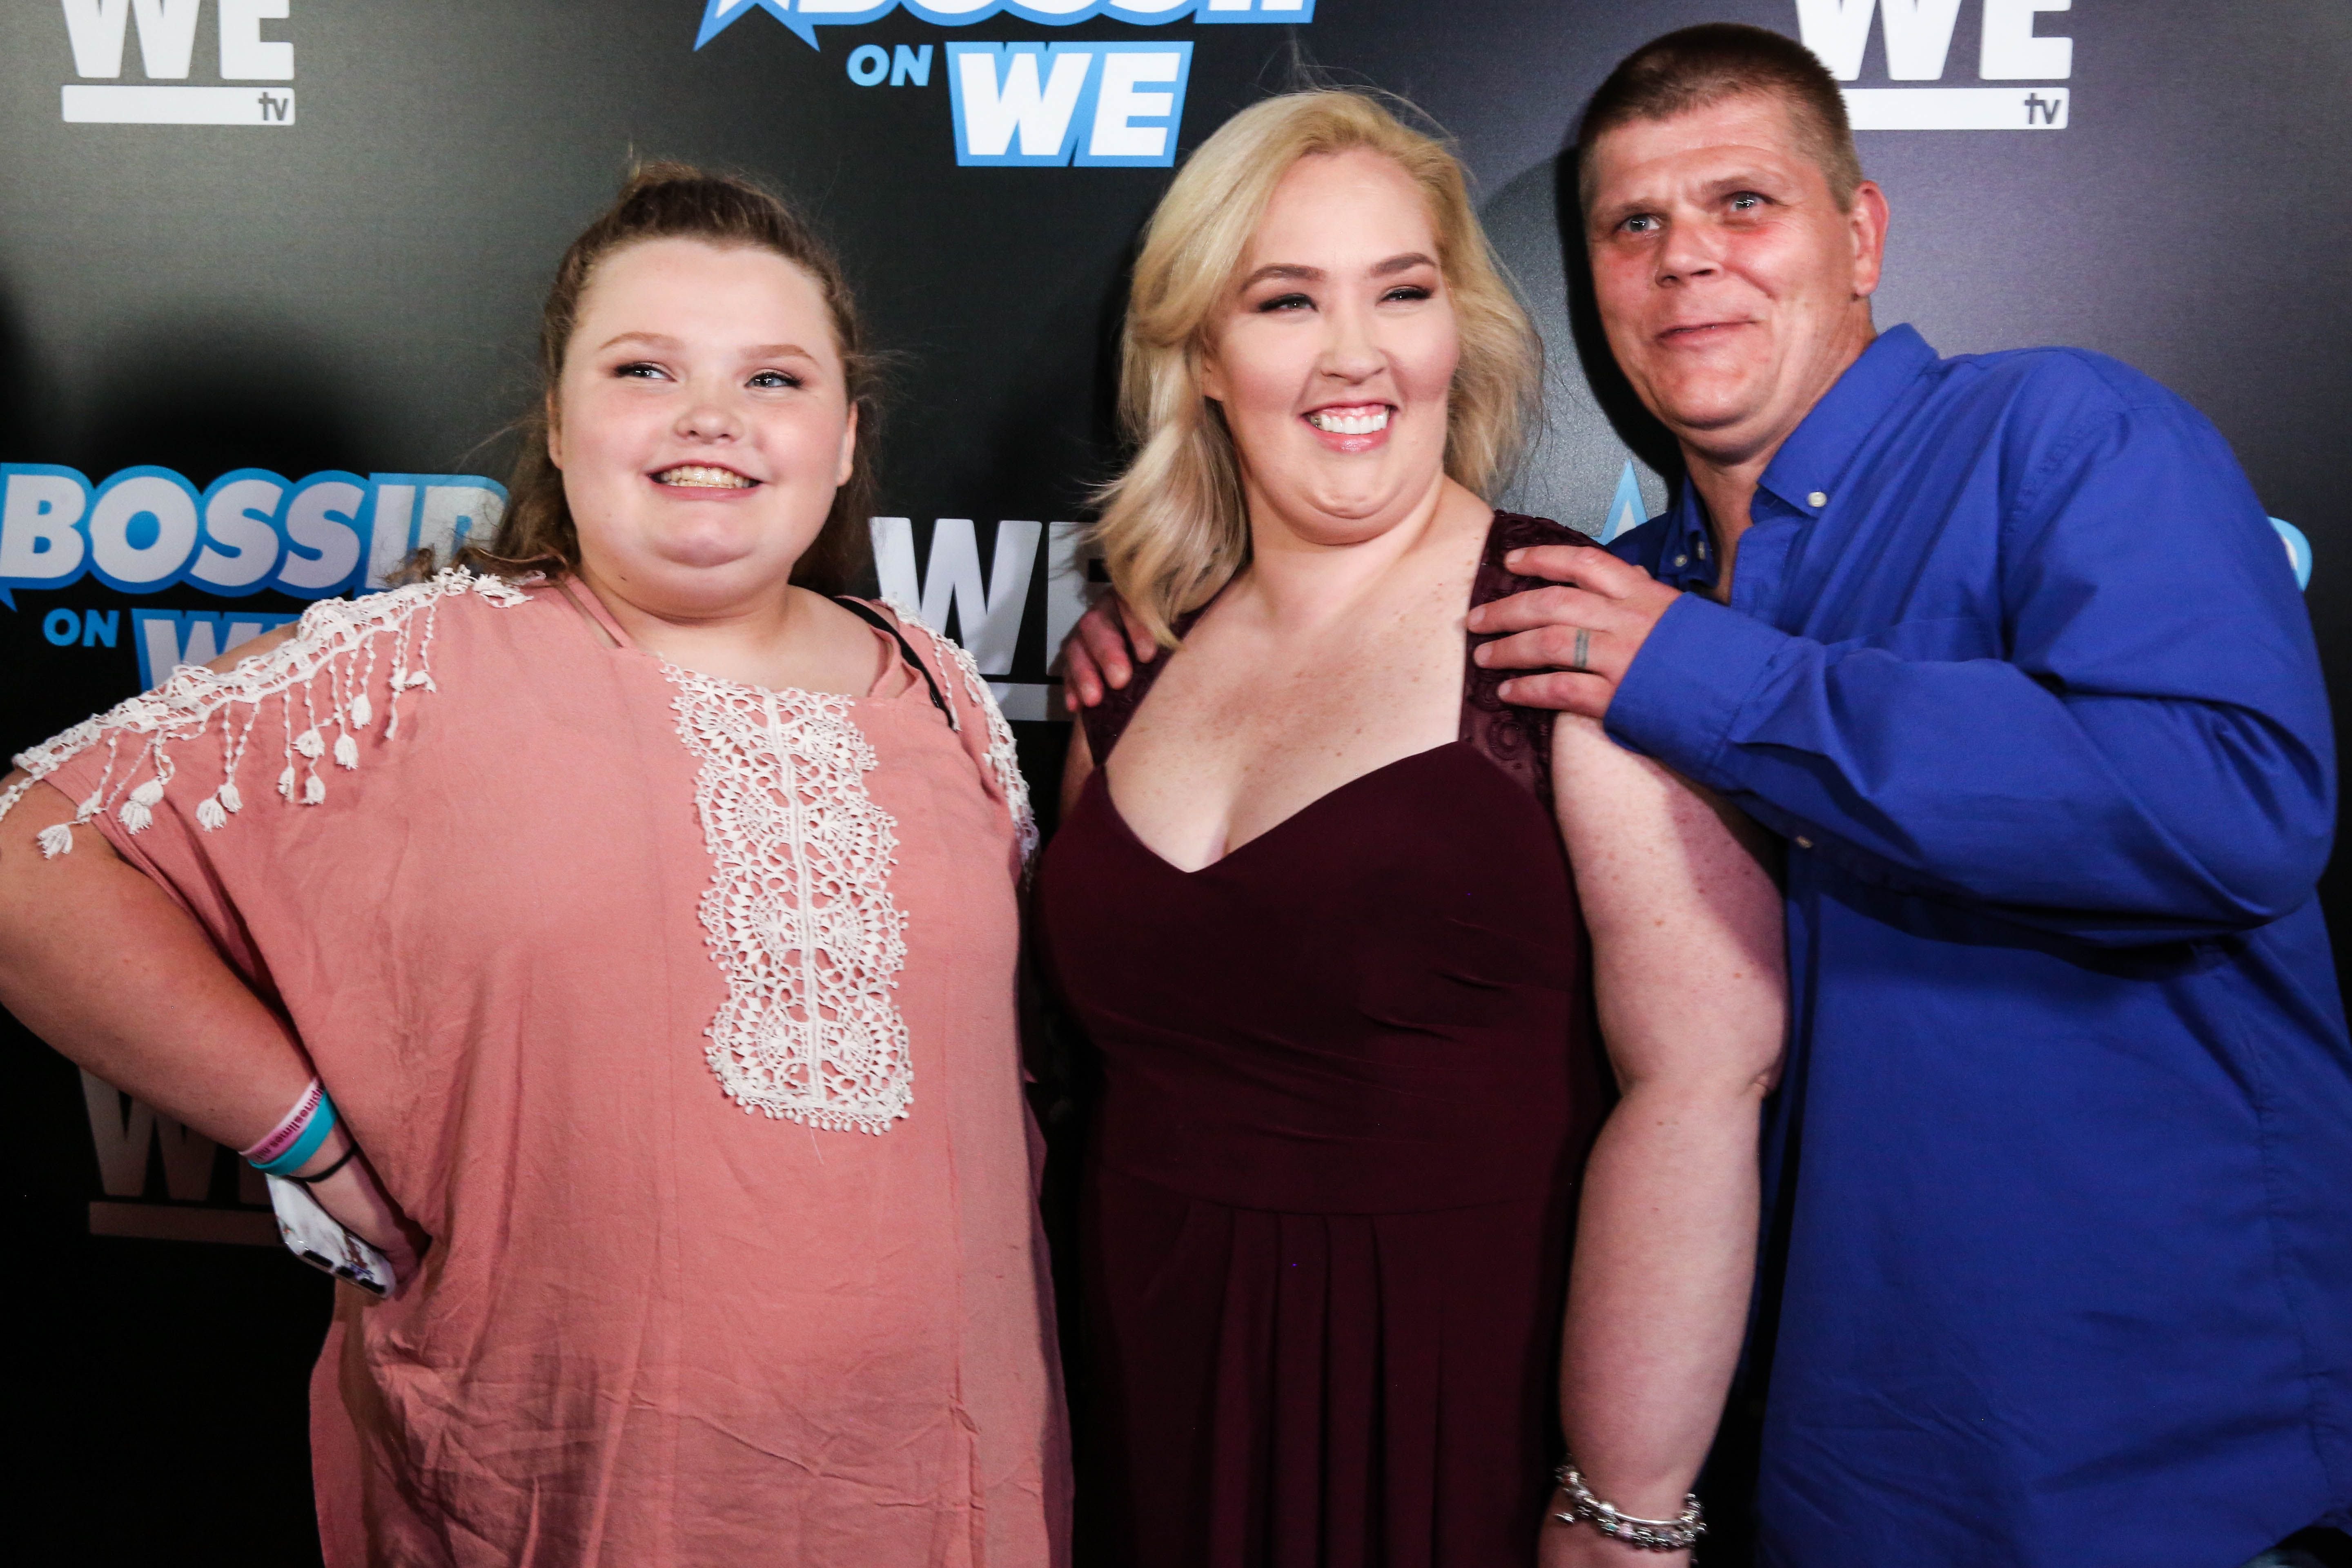 Alana Thompson, Mama June Shannon, and Geno Doak at the 2nd Annual Bossip 'Best Dressed List' event in 2018 in Los Angeles, California | Source: Getty Images